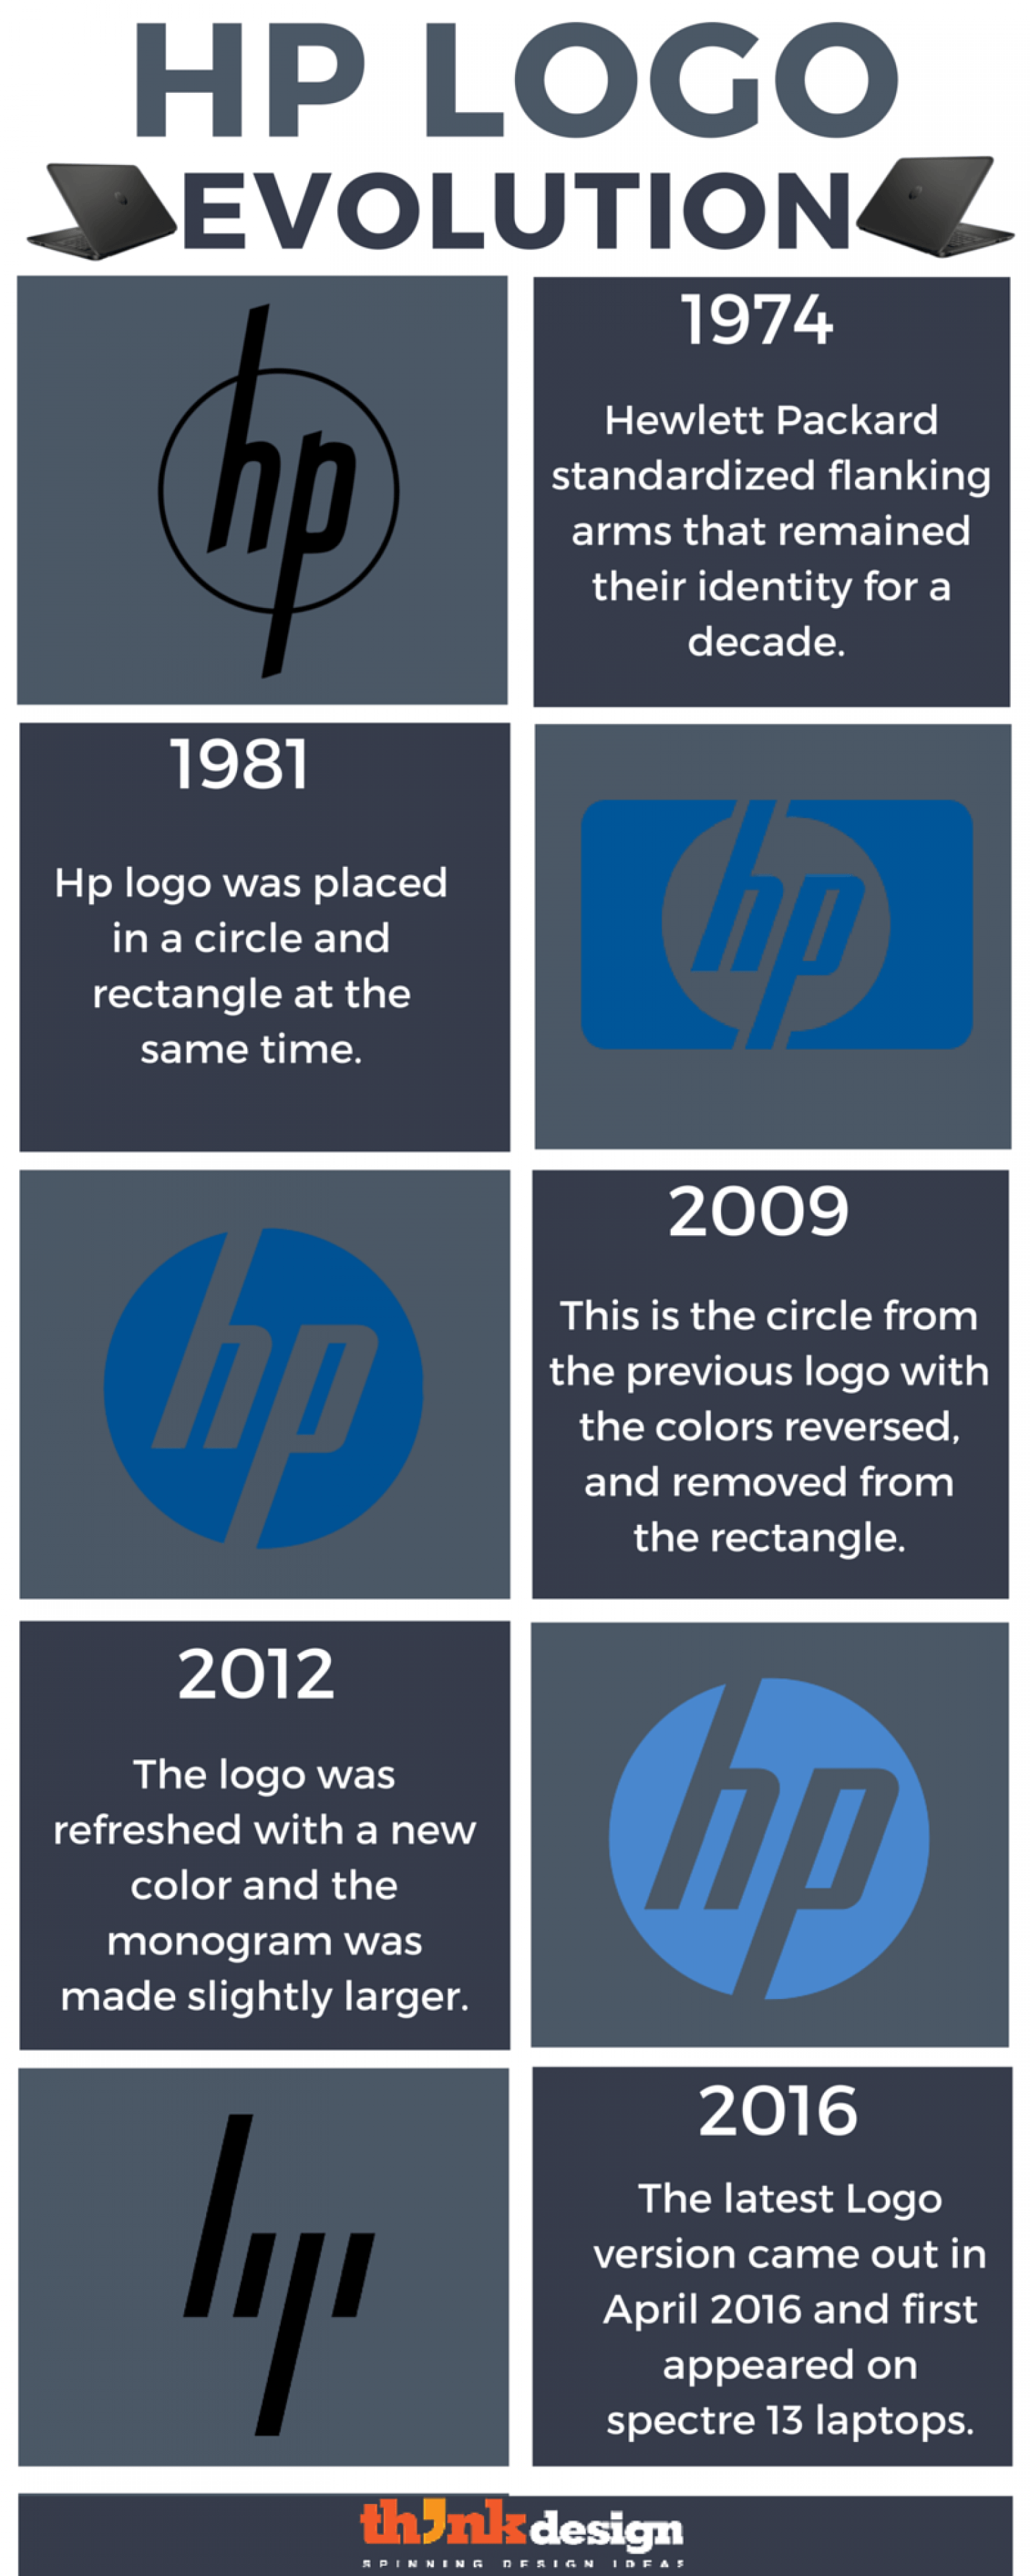 New Hewlett Packard Logo - HP Logo Evolution - The Journey of an Iconic Logo | Visual.ly